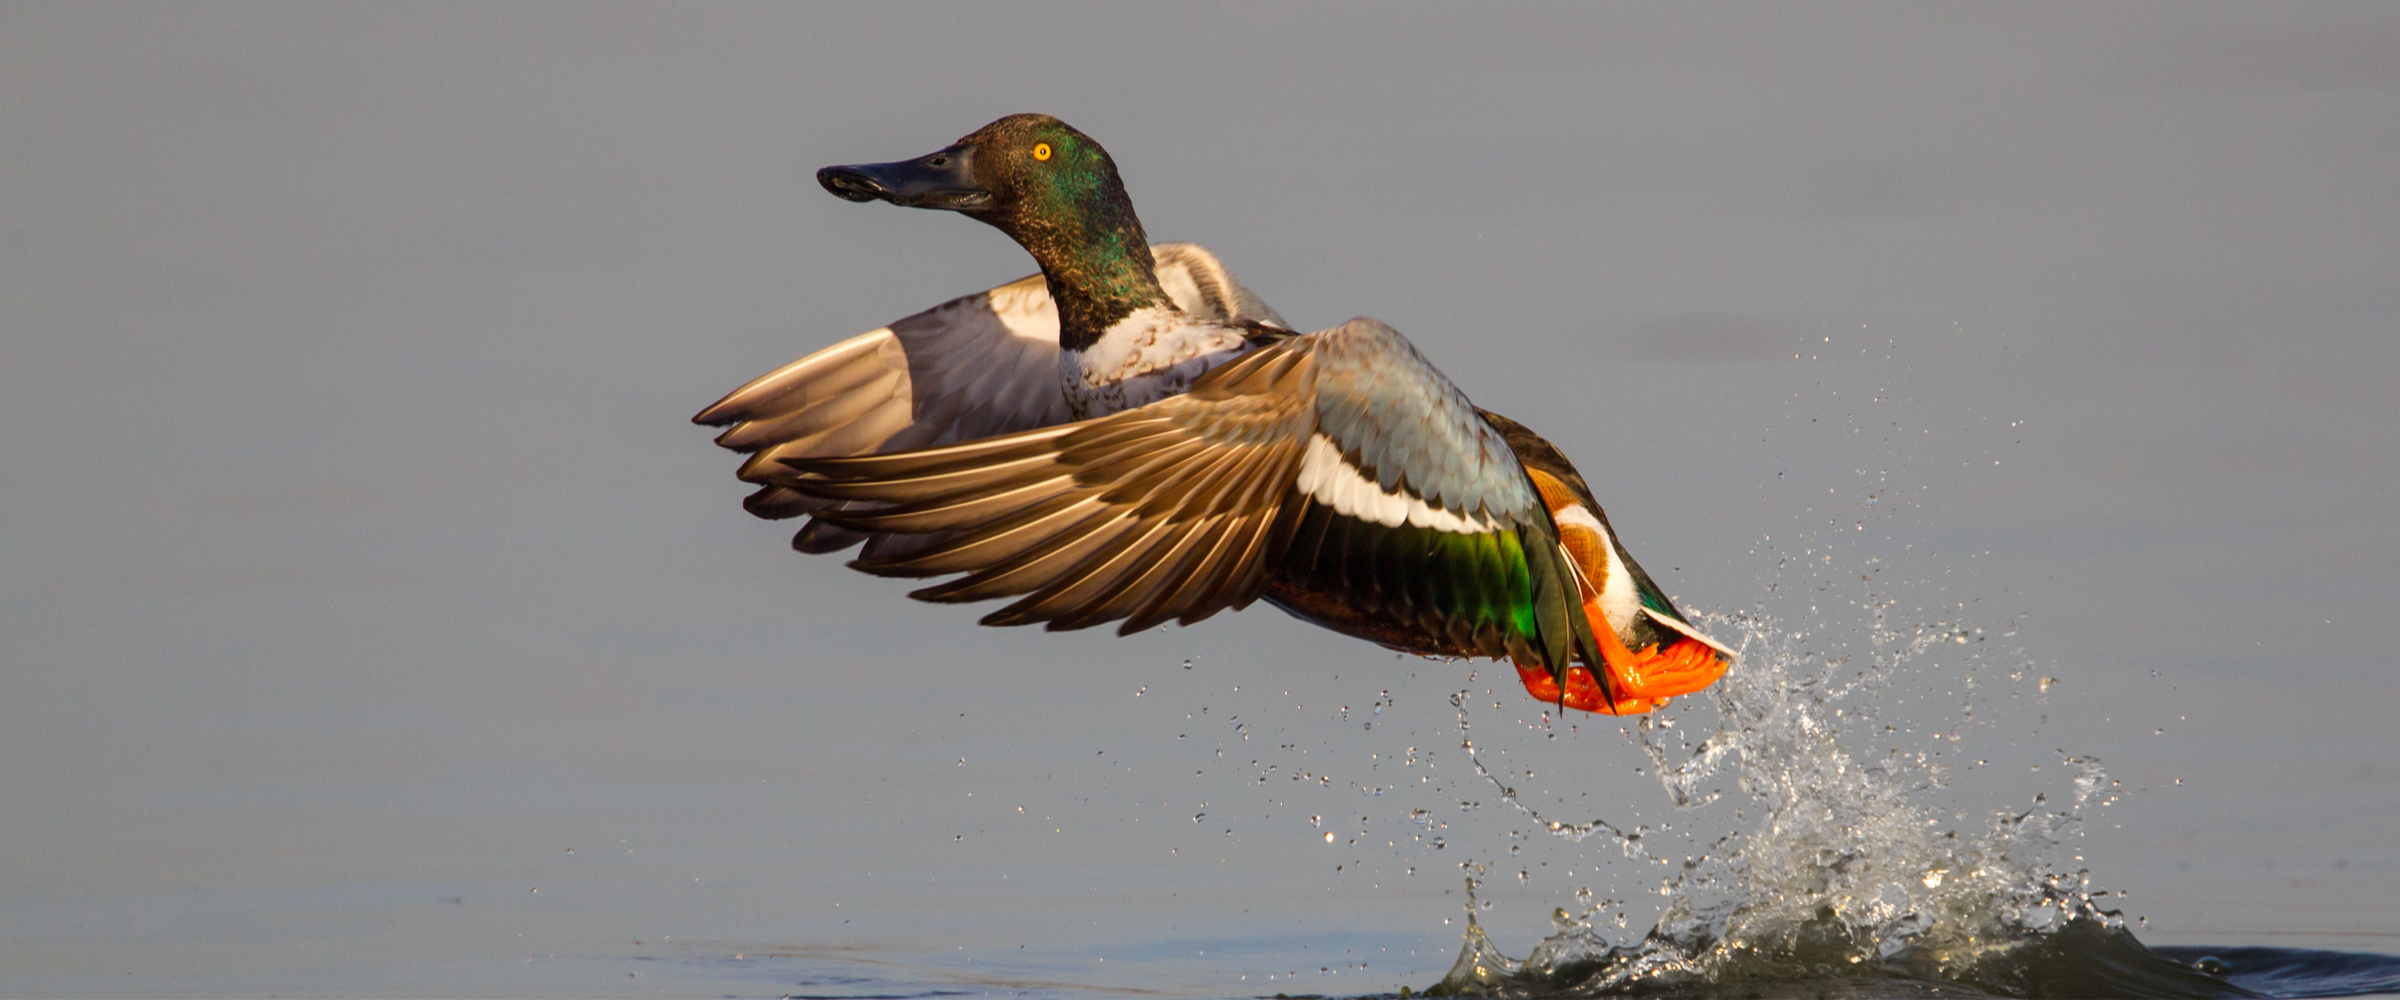 A male Northern Shoveler takes off from the water, leaving a splash in its wake.